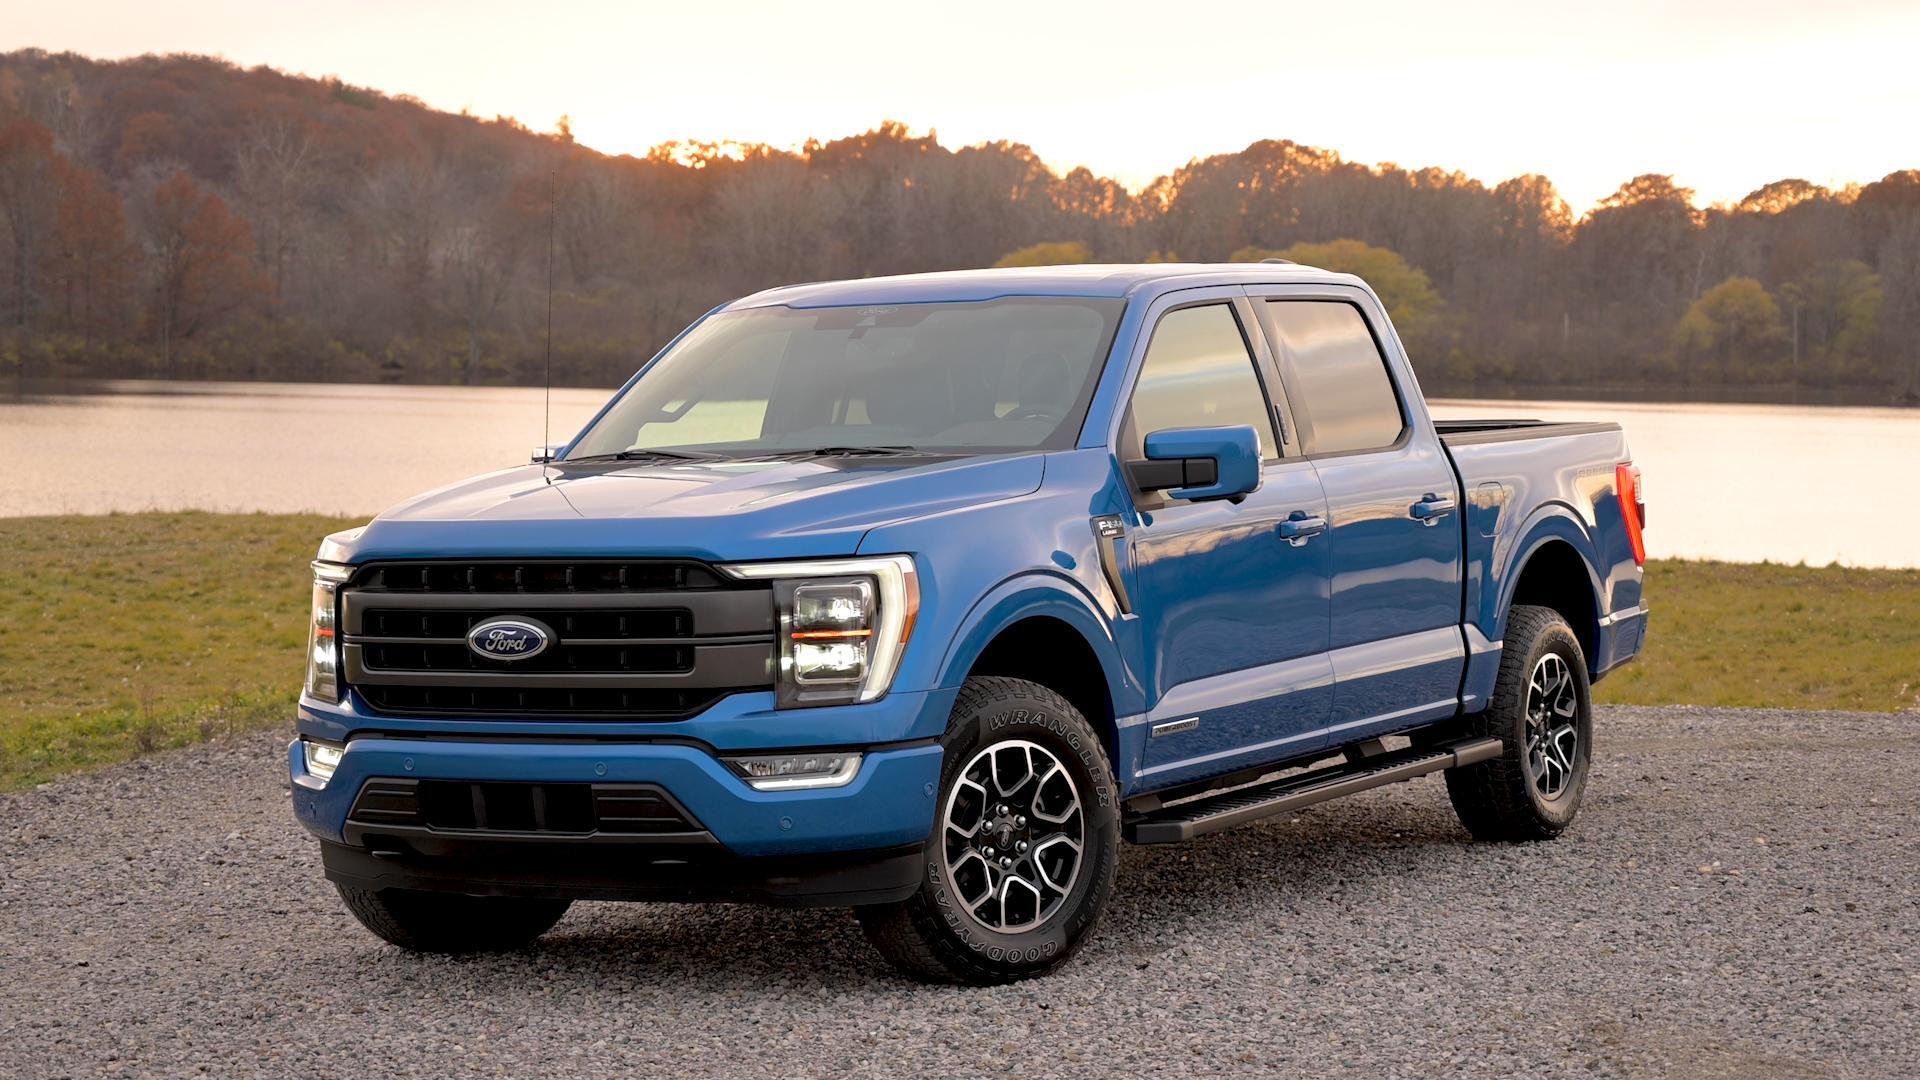 2021 Ford F-150 Pickup Is Less of an Overhaul Than We Expected